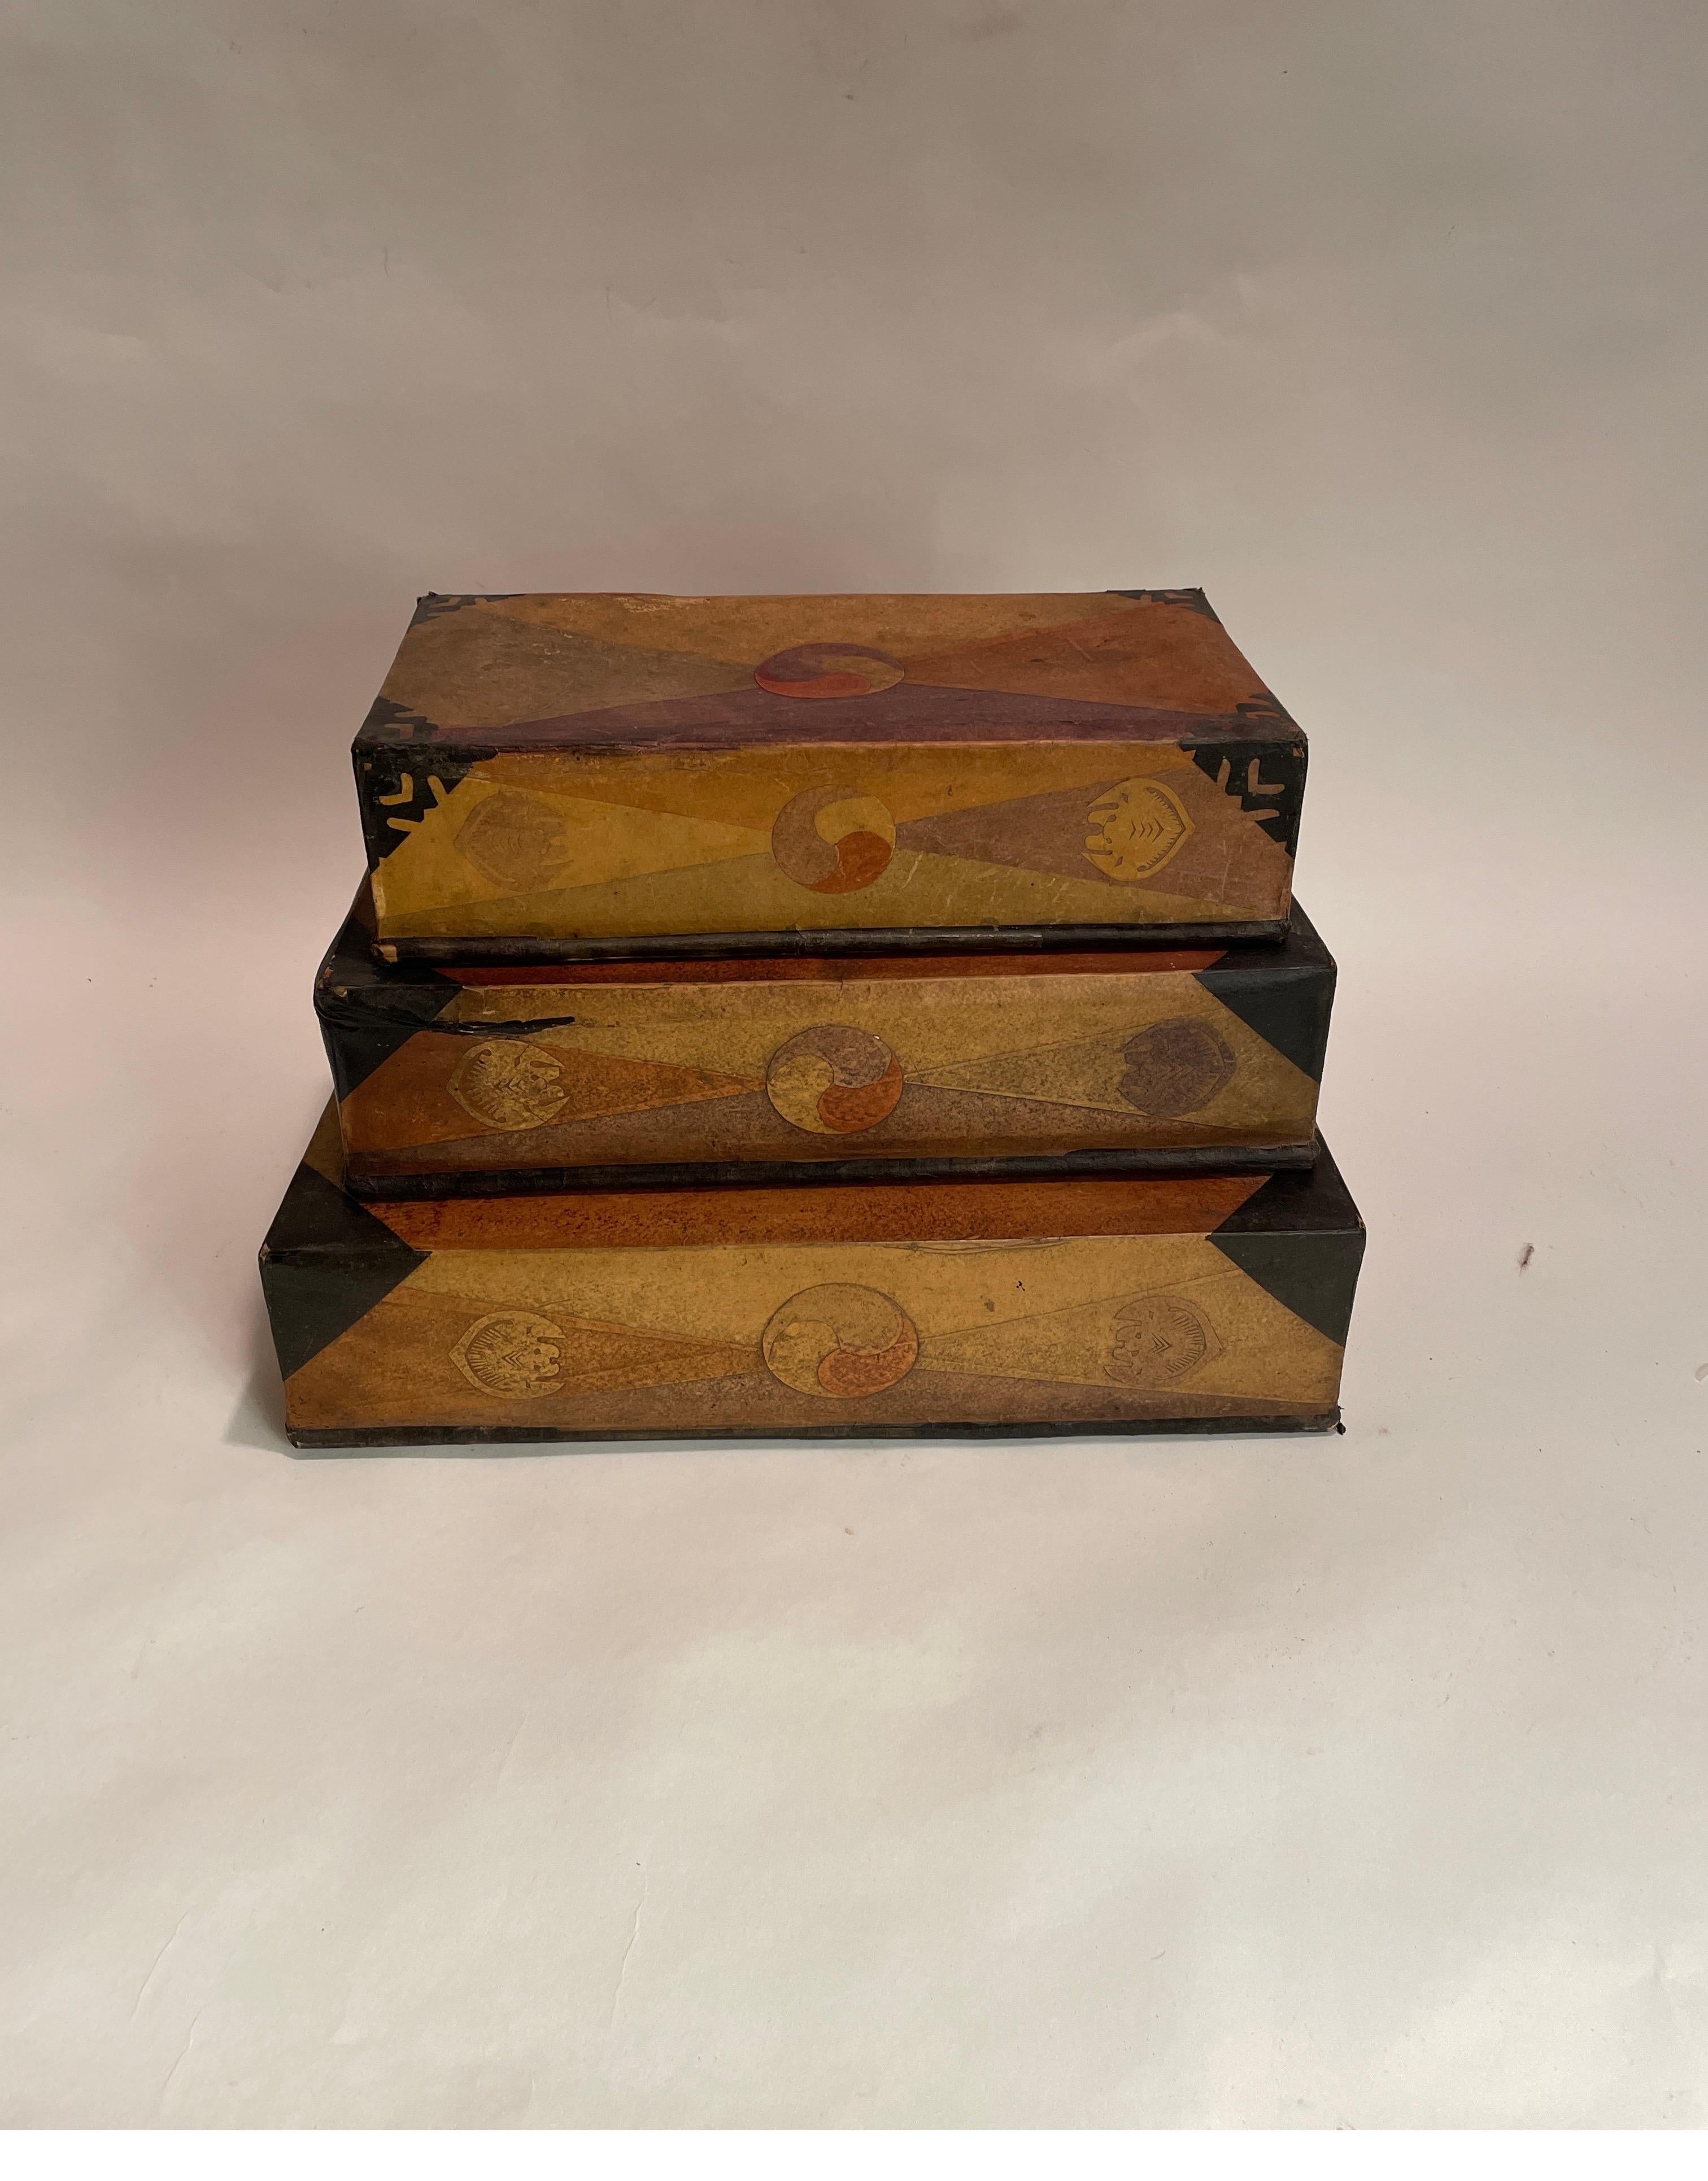 A set of 3 antique Korean paper mache sewing boxes from the Choson period.